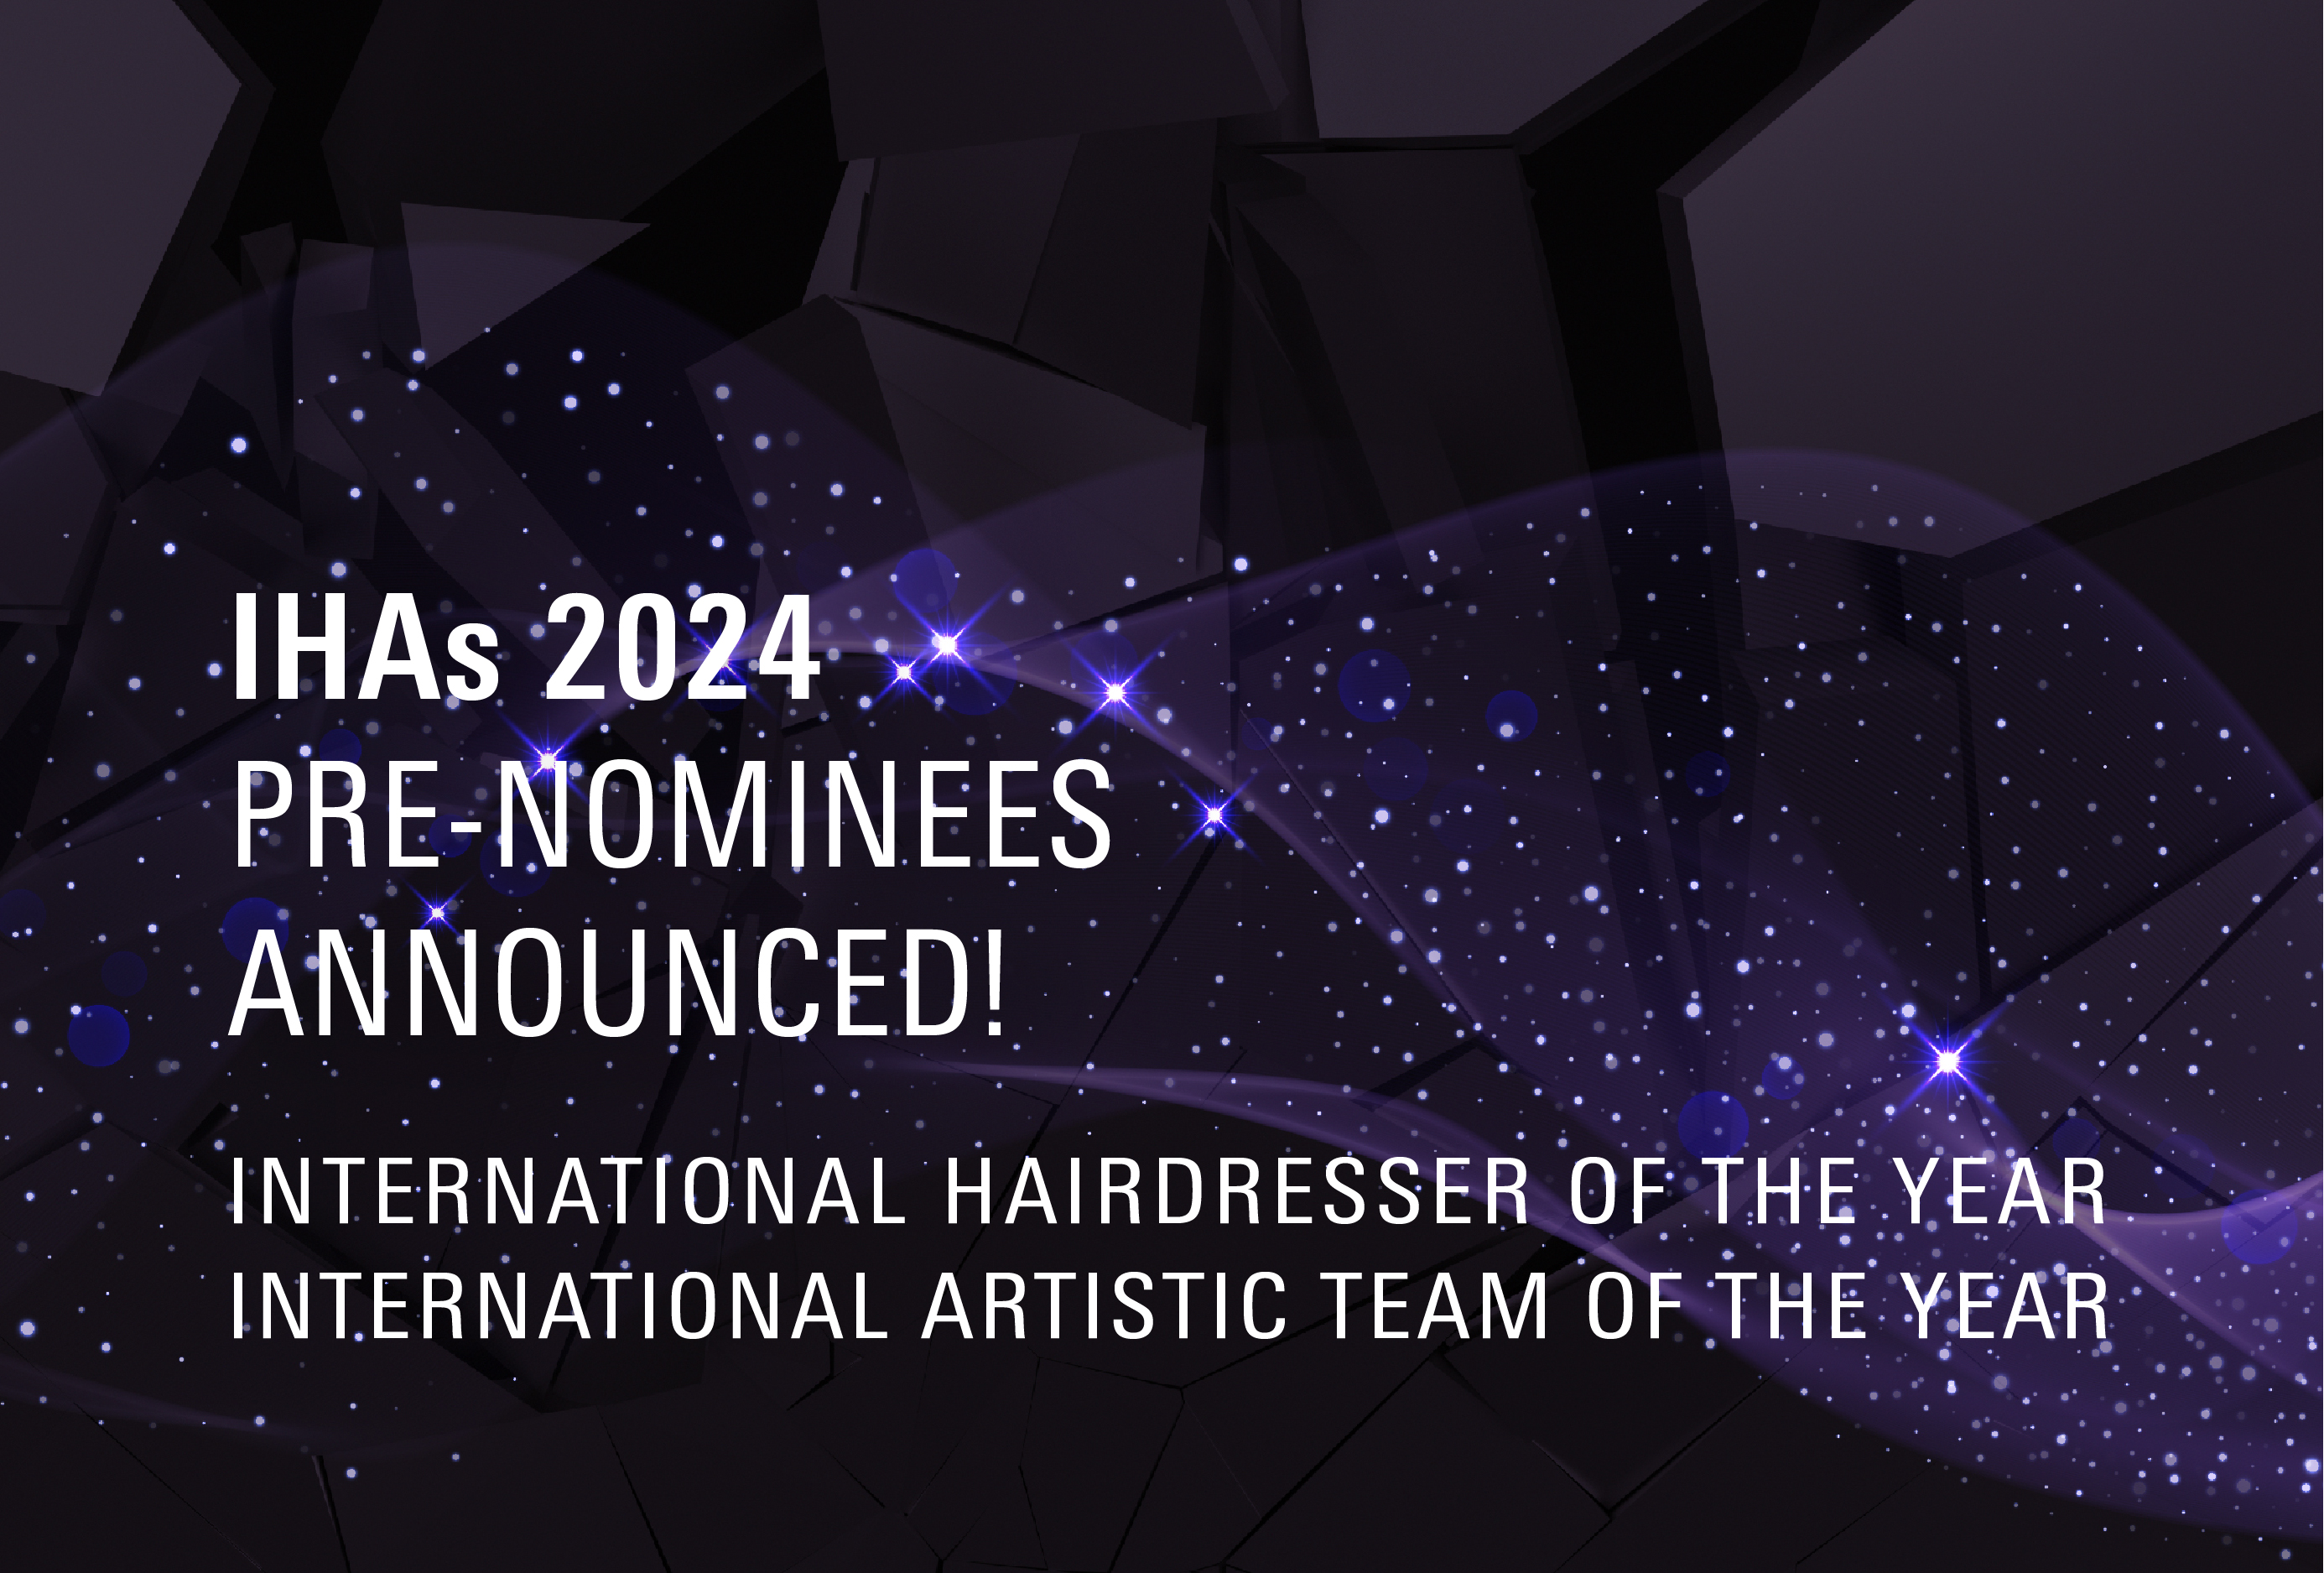 International Hairdressing Awards® announce the pre-nominees